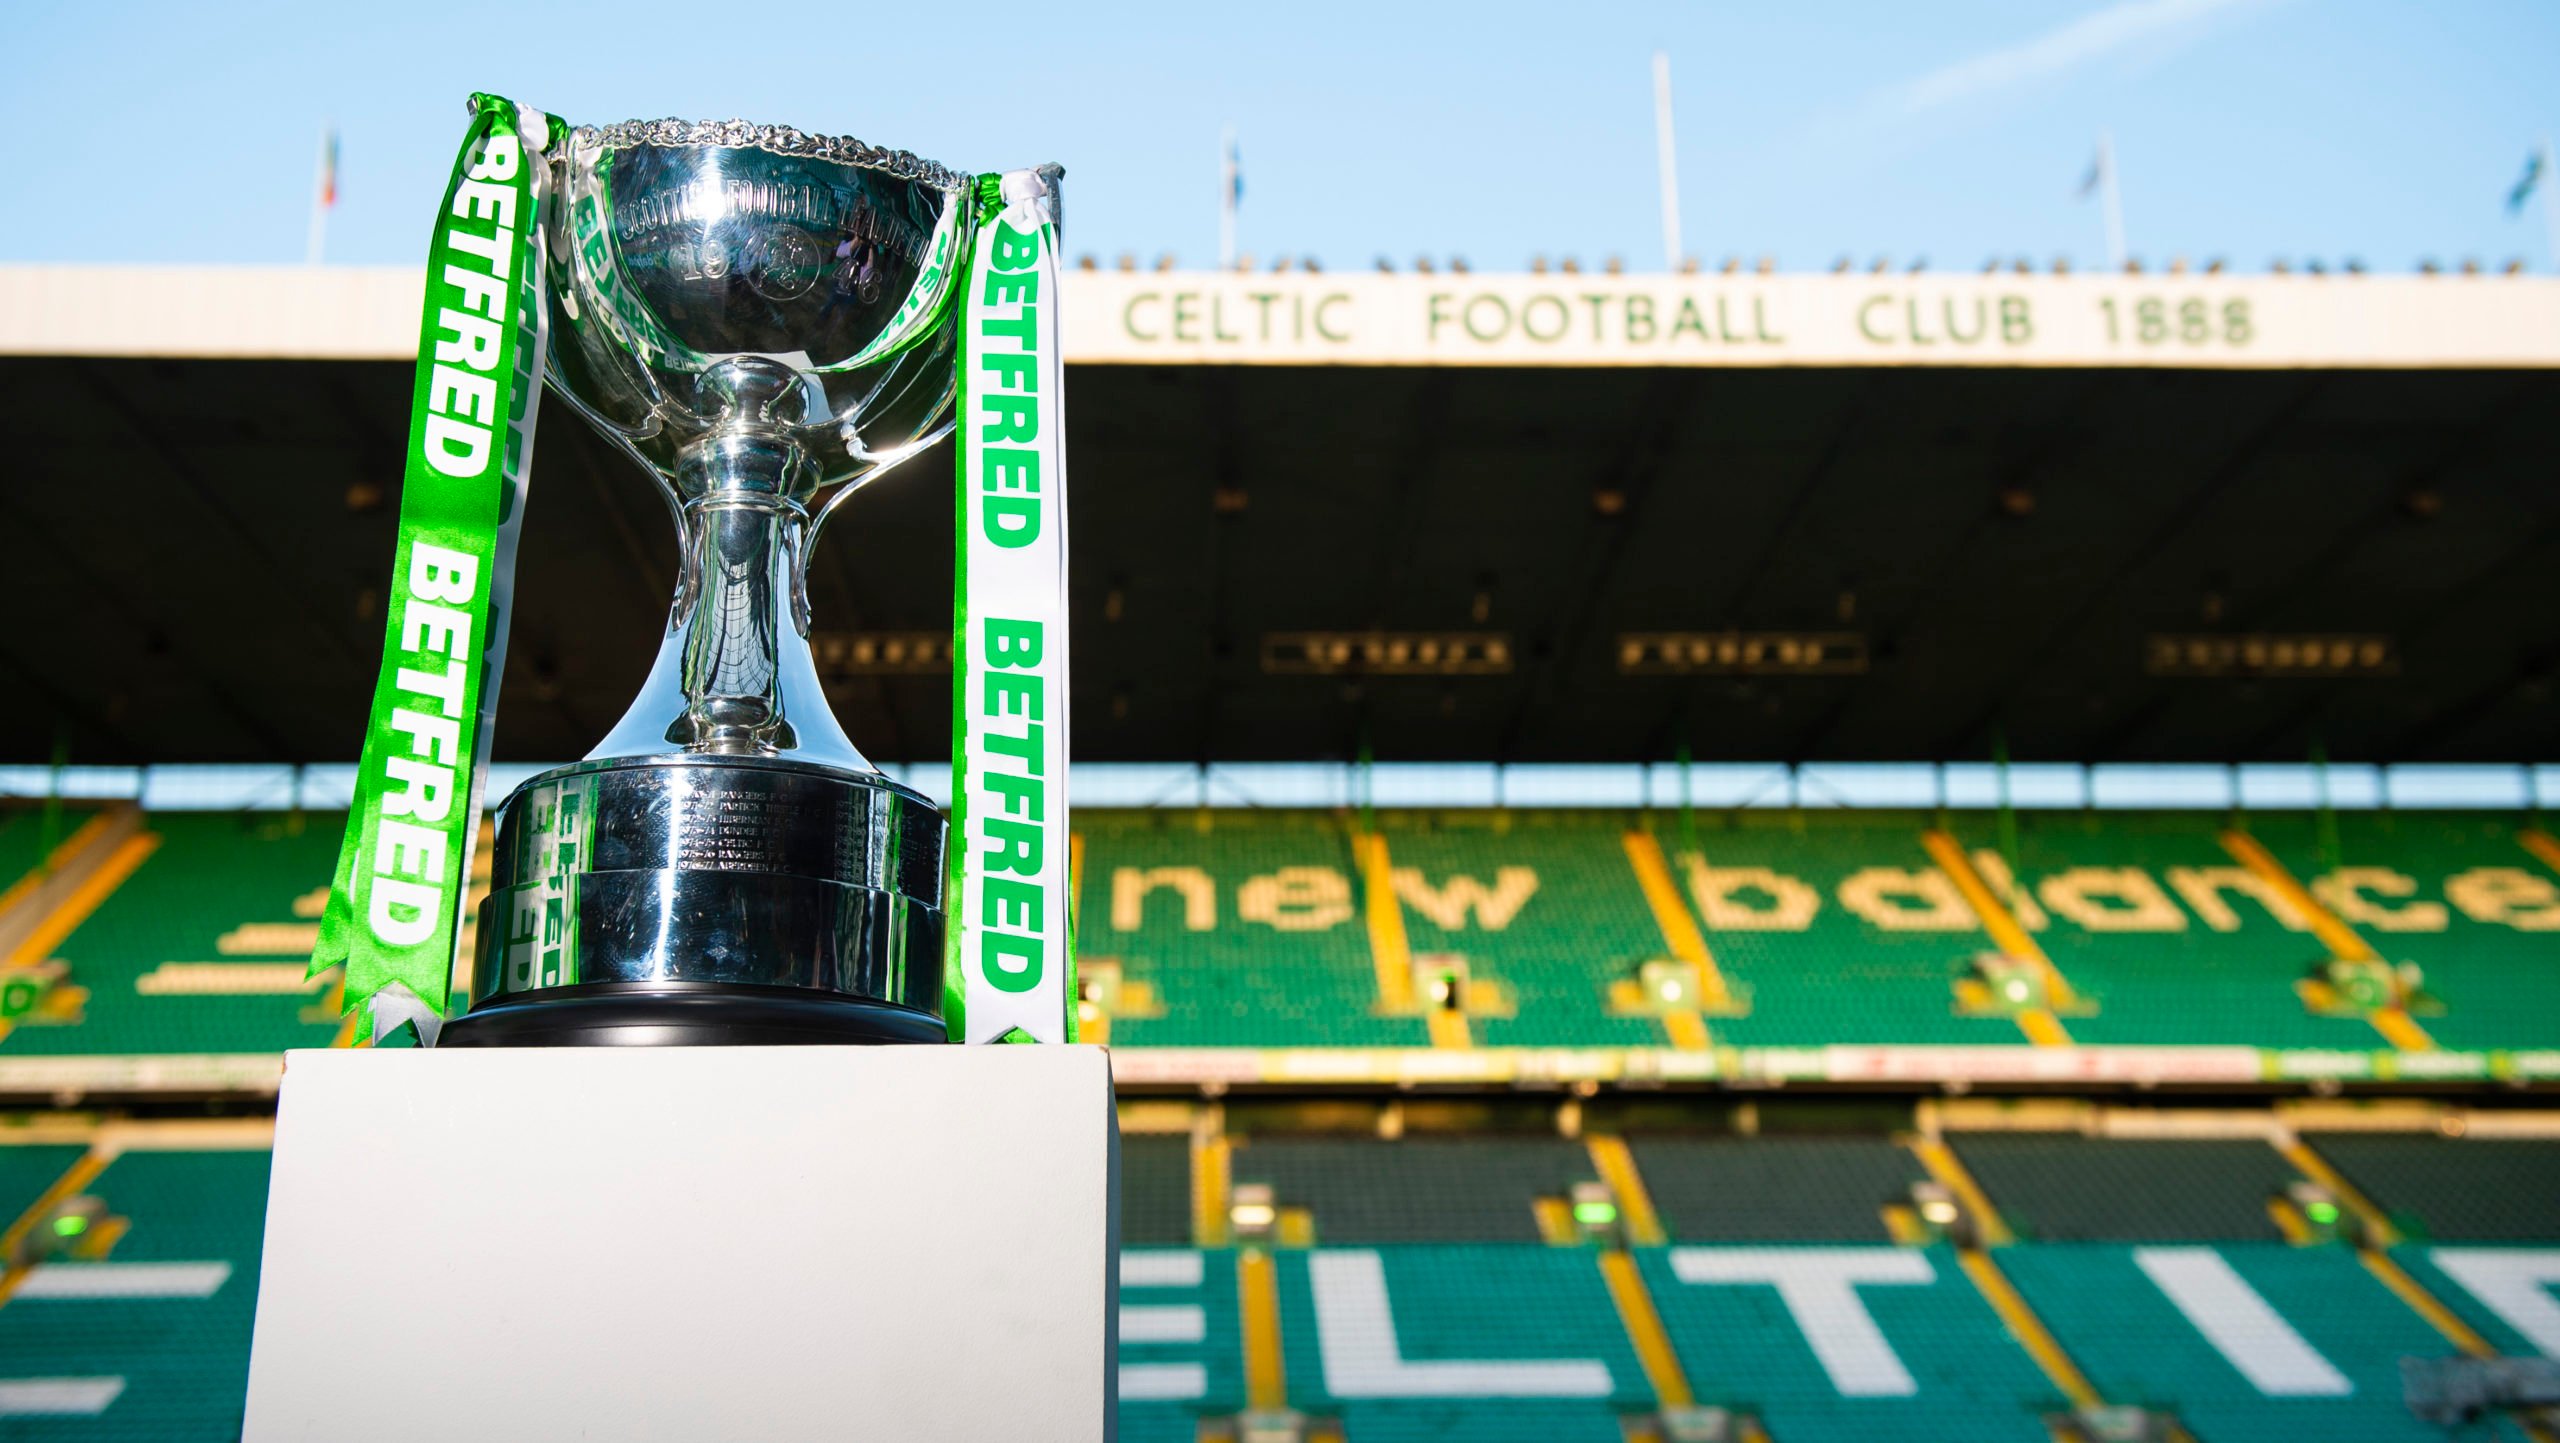 Celtic announce that Betfred Cup tie will be available free of charge to season ticket holders